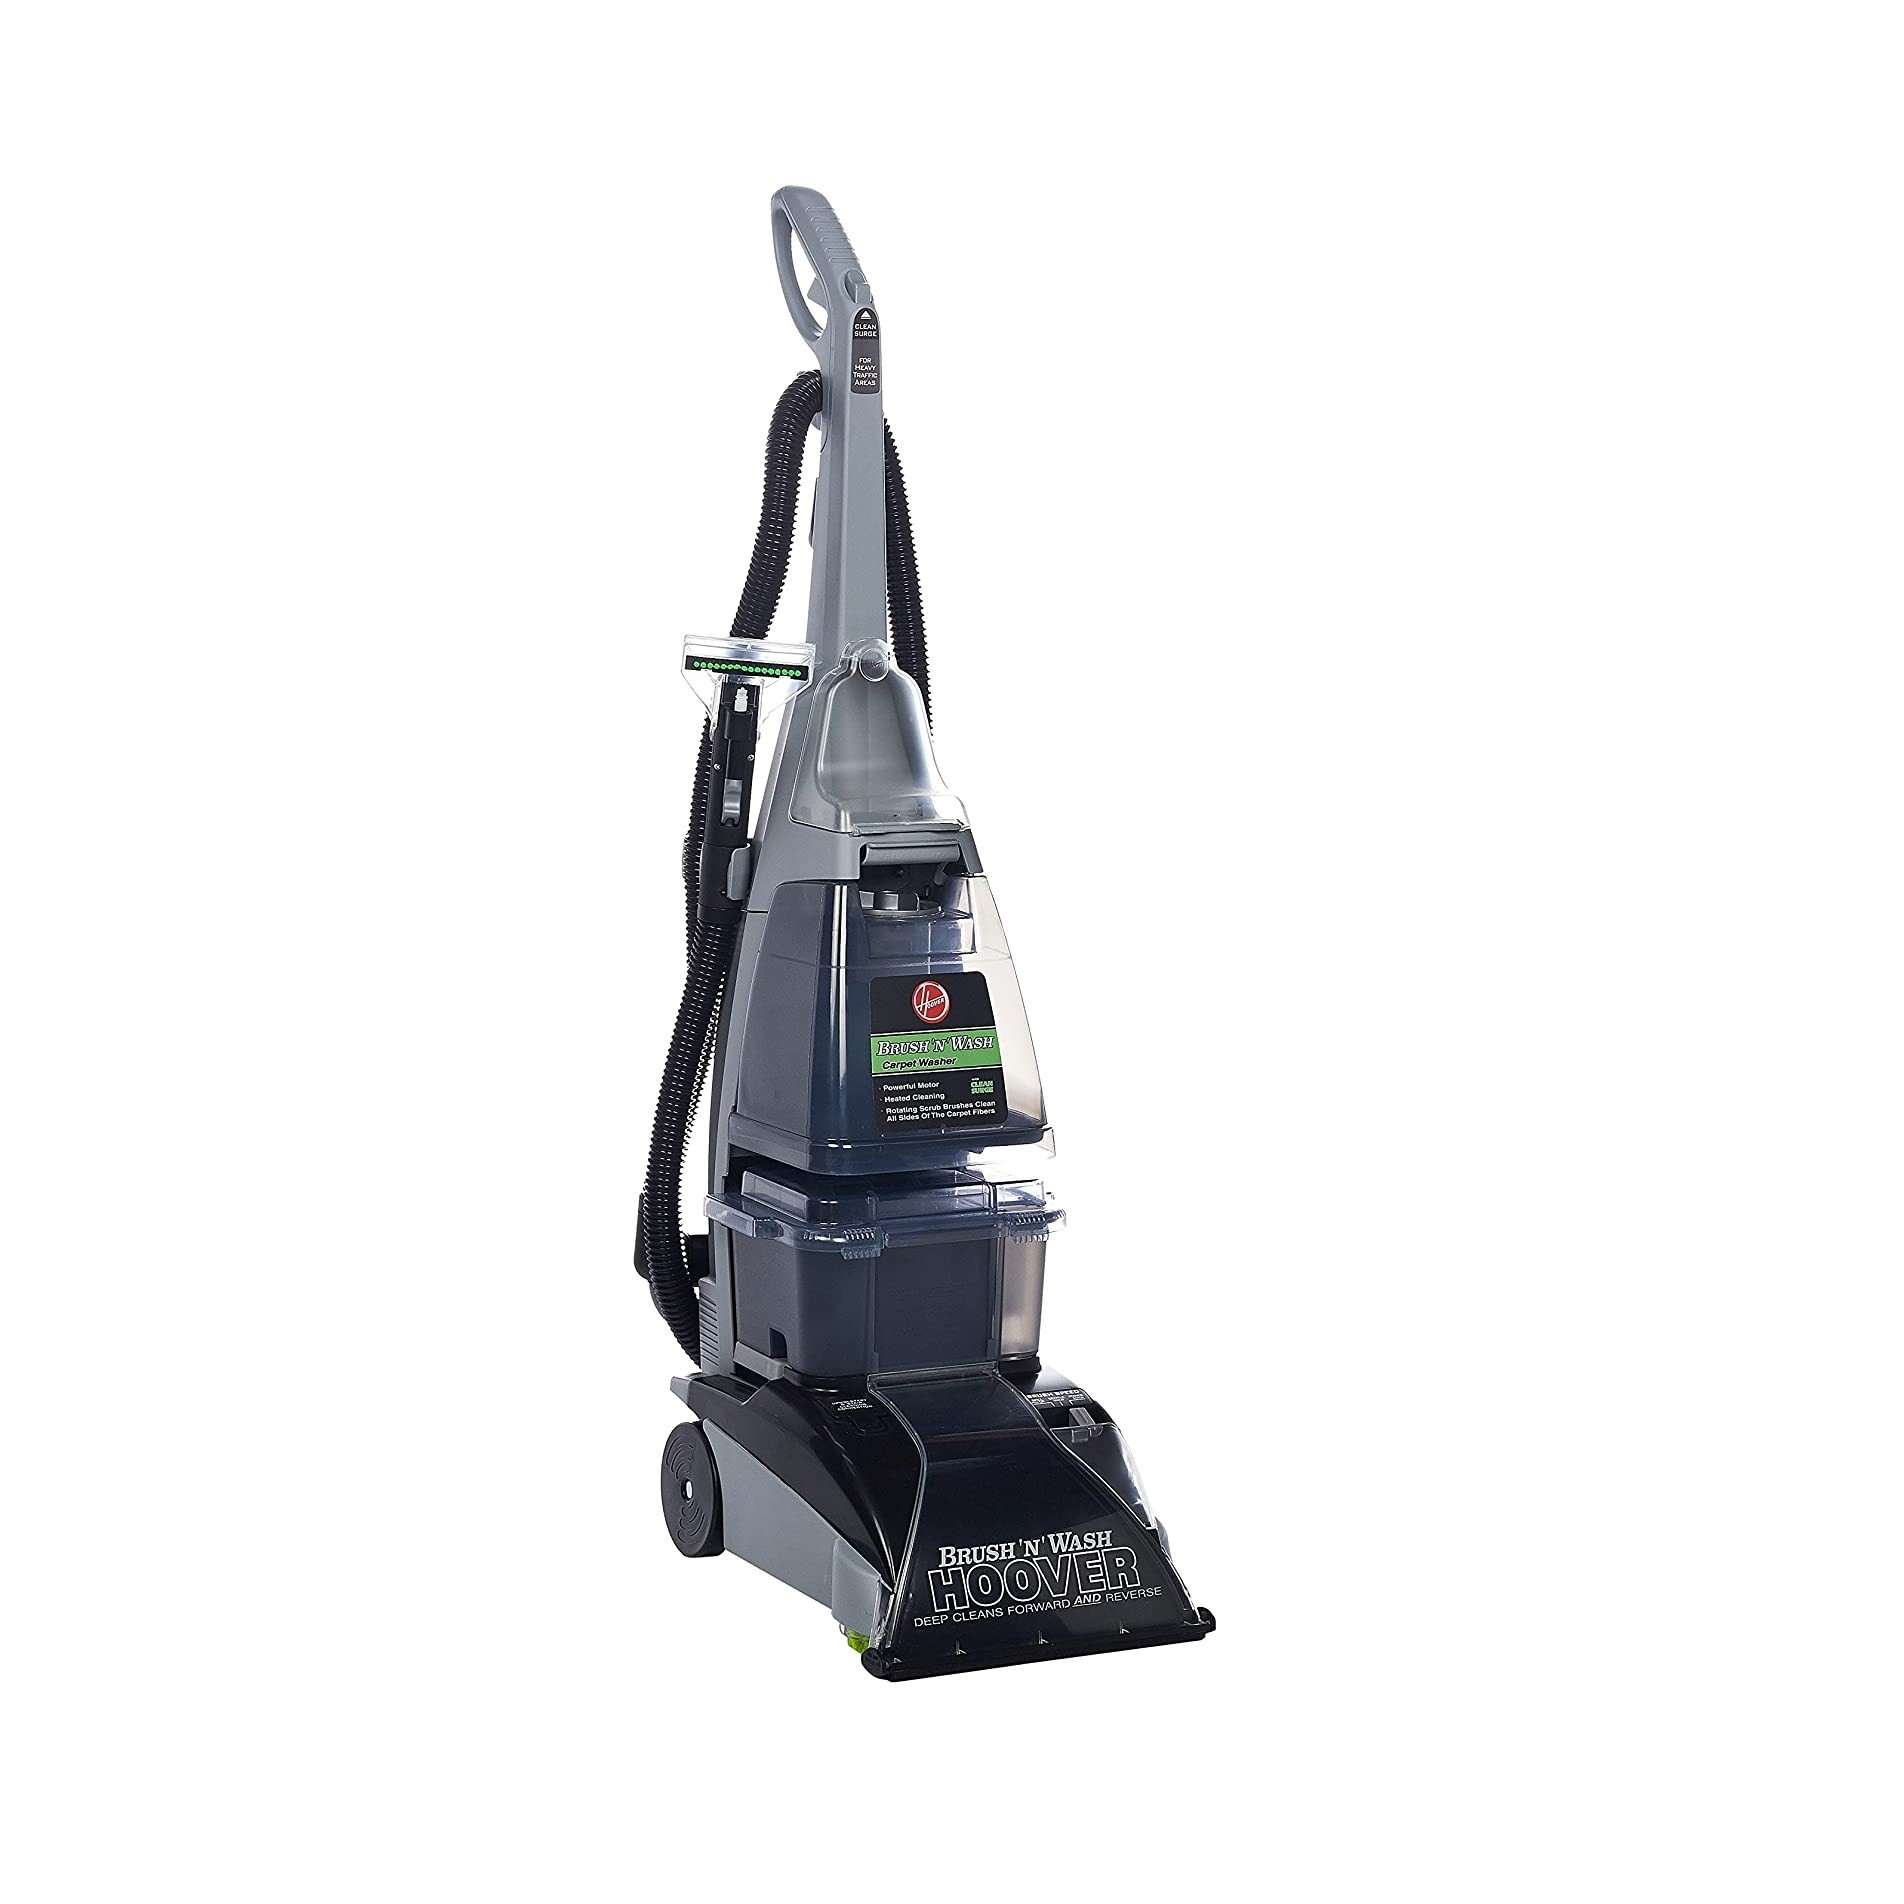 Hoover 2-in-1 Carpet and Hard Floor Washer with Deep Cleaning Technology for Stubborn Stains and Heated Drying after Washing, Brush and Wash - F5916901